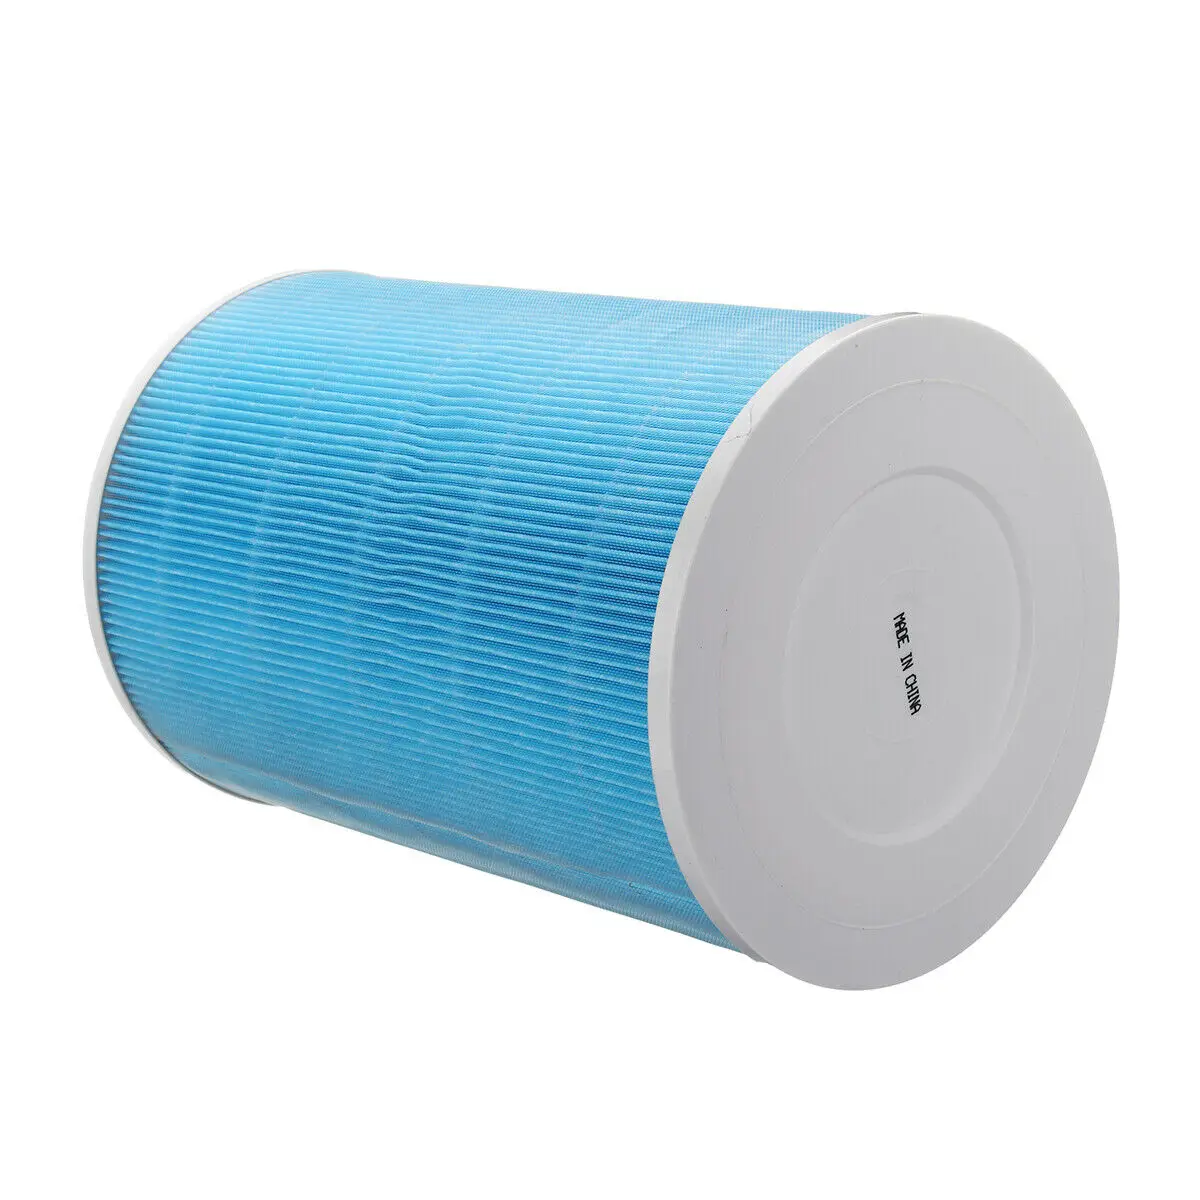 Cleaner Removal Filter For Xiaomi Mi Smart Air Purifier Pro 2S Home Improvement Home Garden Supplies